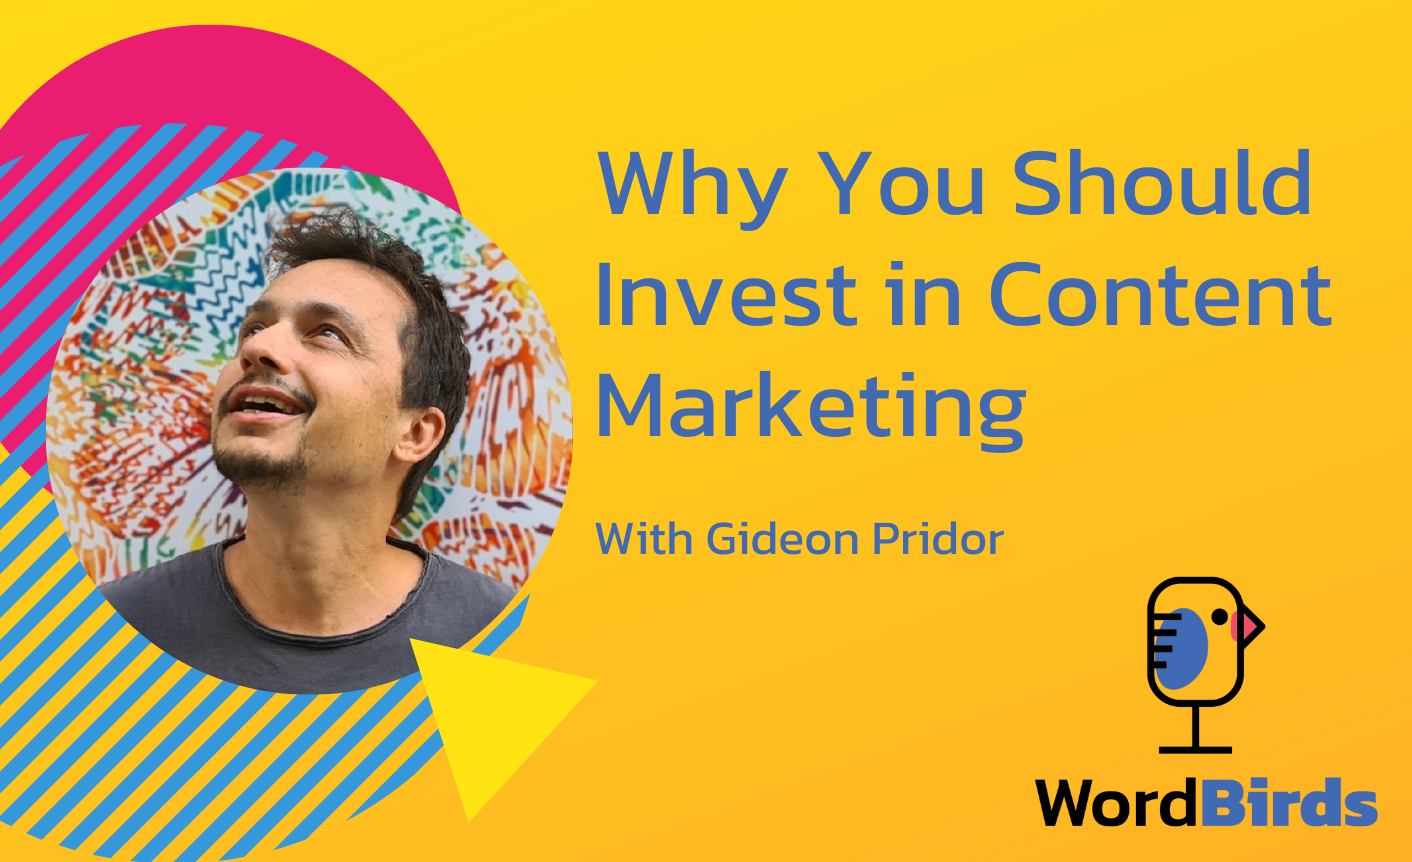 On a yellow background with a headshot of Gideon Pridor on the left, the title reads "Why You Should Invest in Content Marketing."